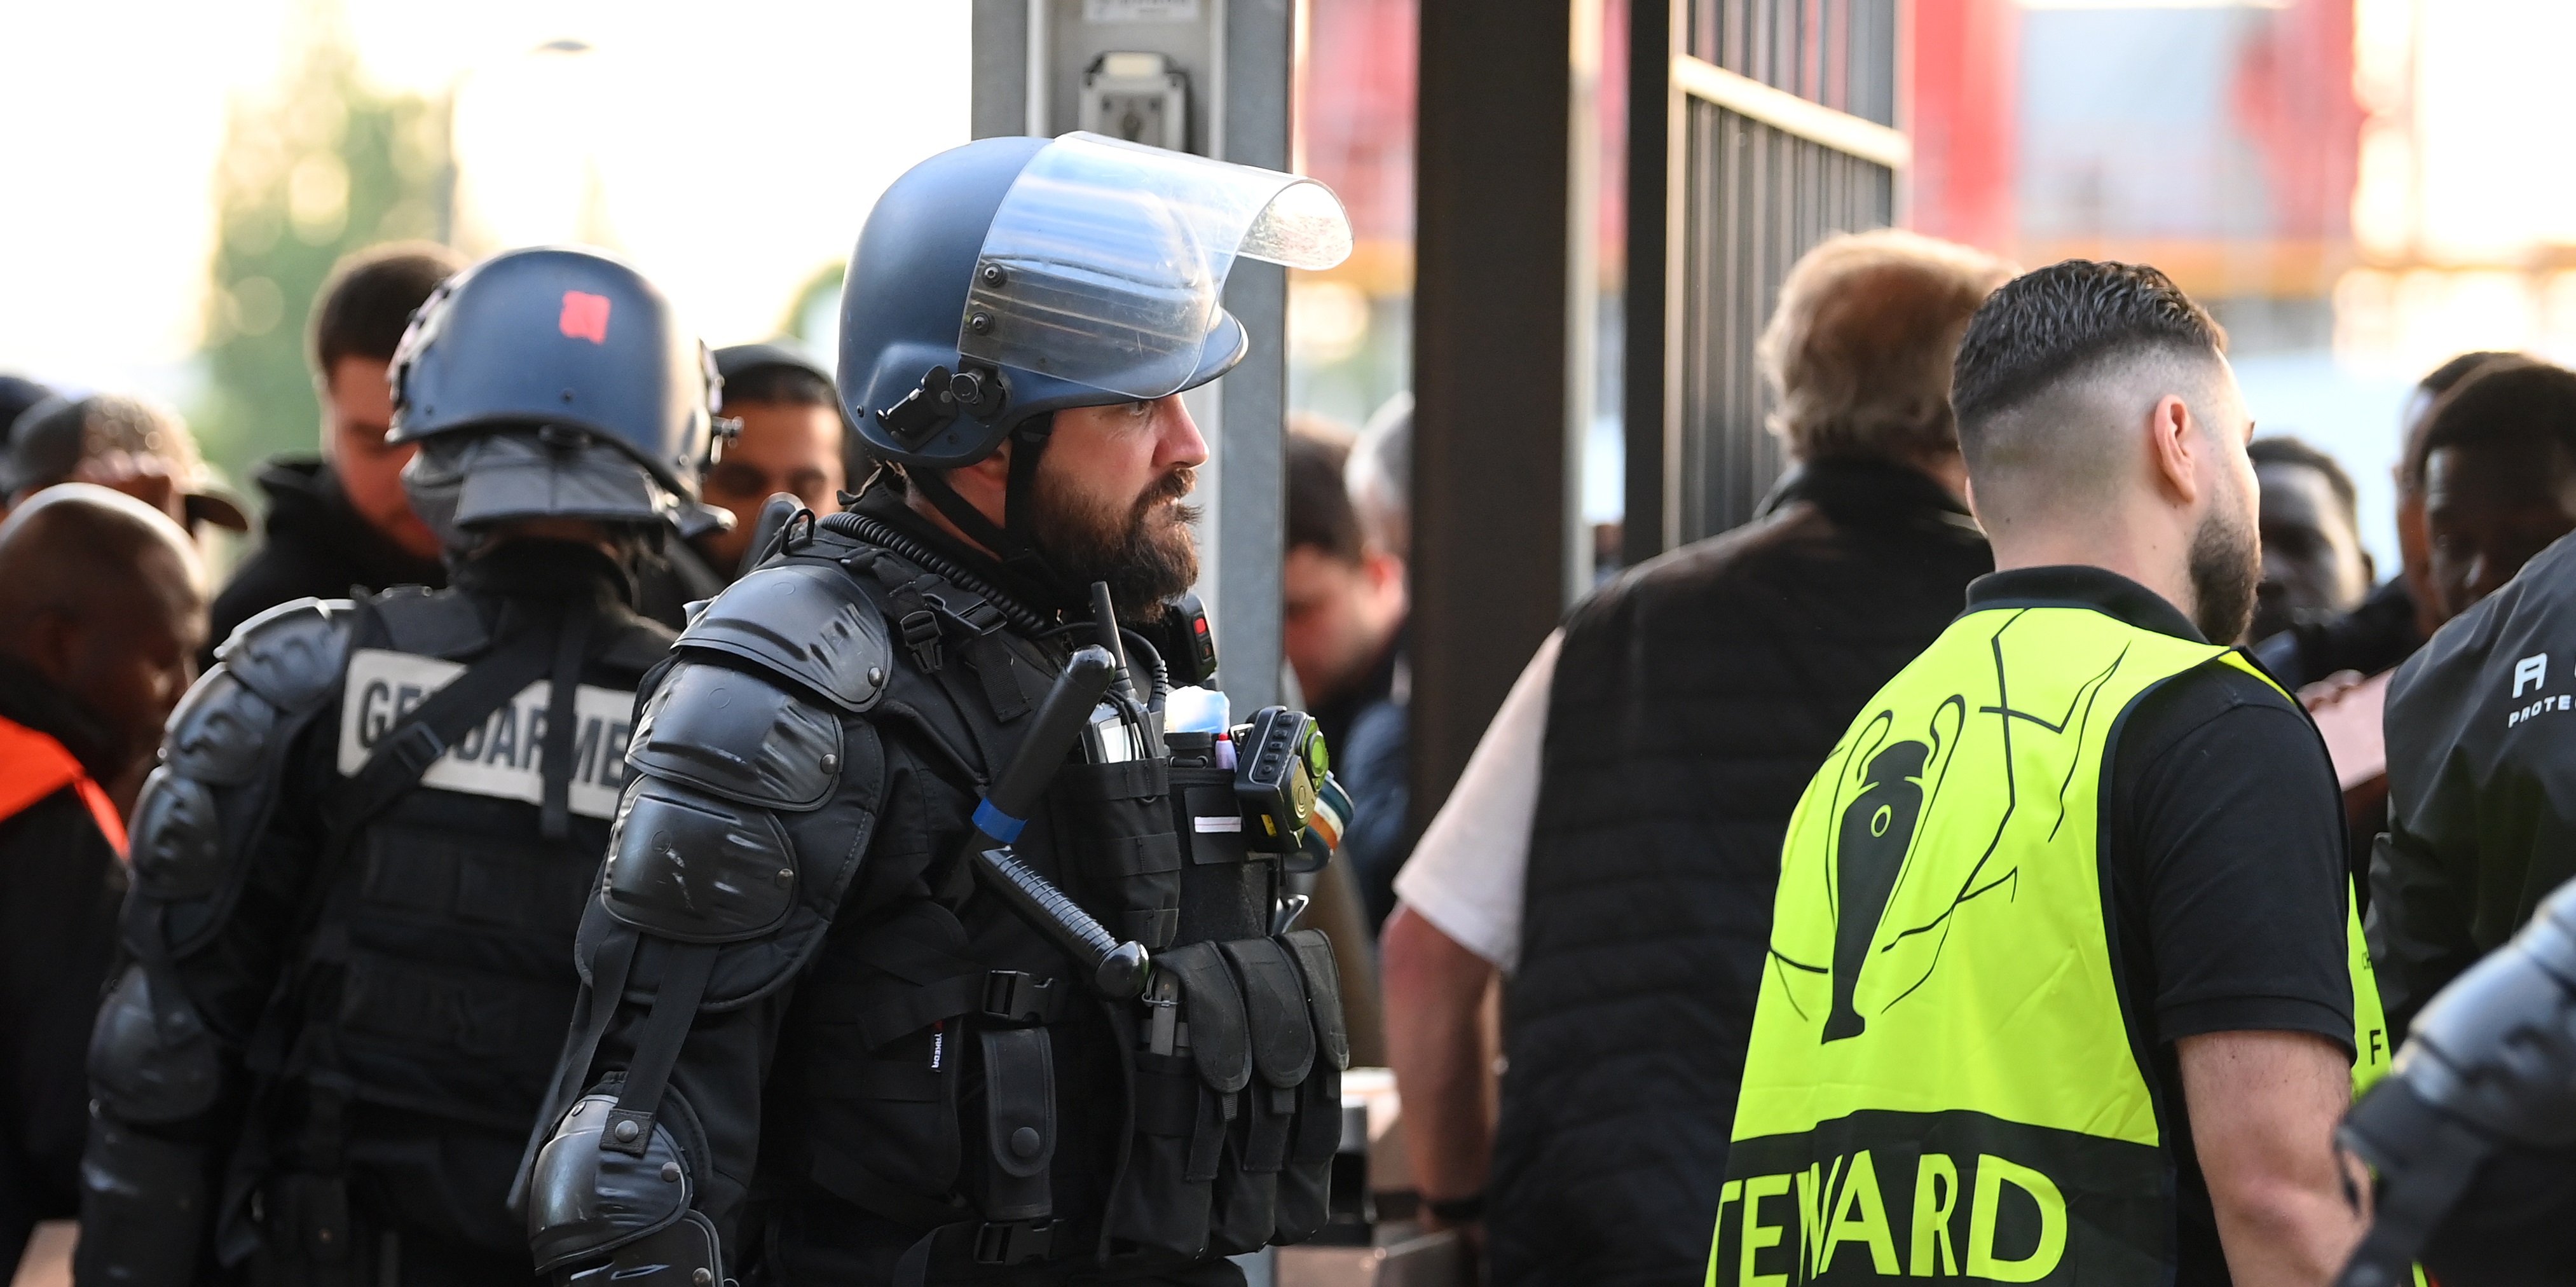 ‘What a load of rubbish!’ – Super-agent savages UEFA & suggests reason for French police’s abominable treatment of Liverpool fans